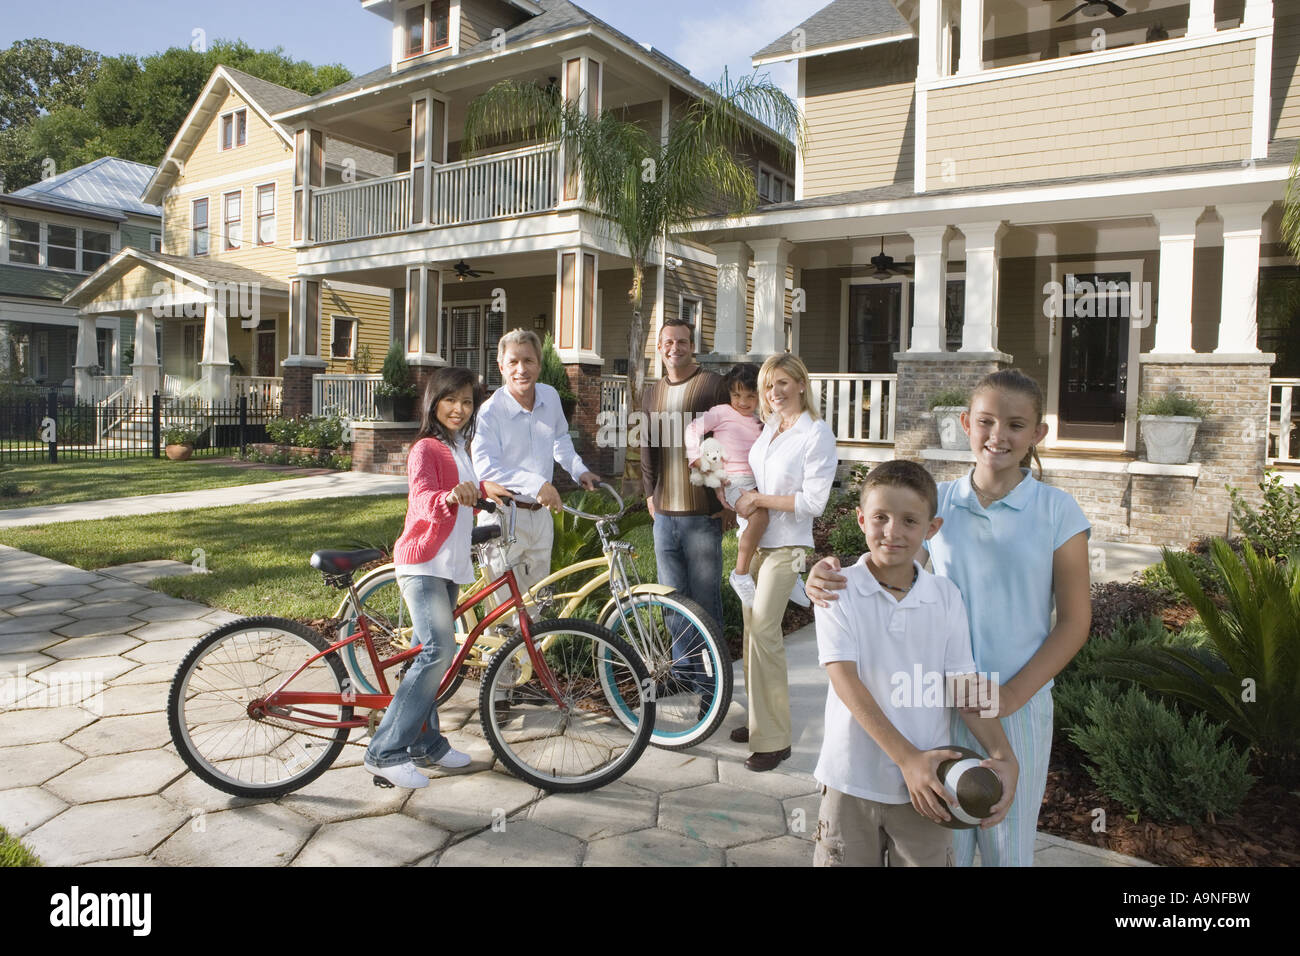 Family with young children standing with neighbors in front of house Stock Photo